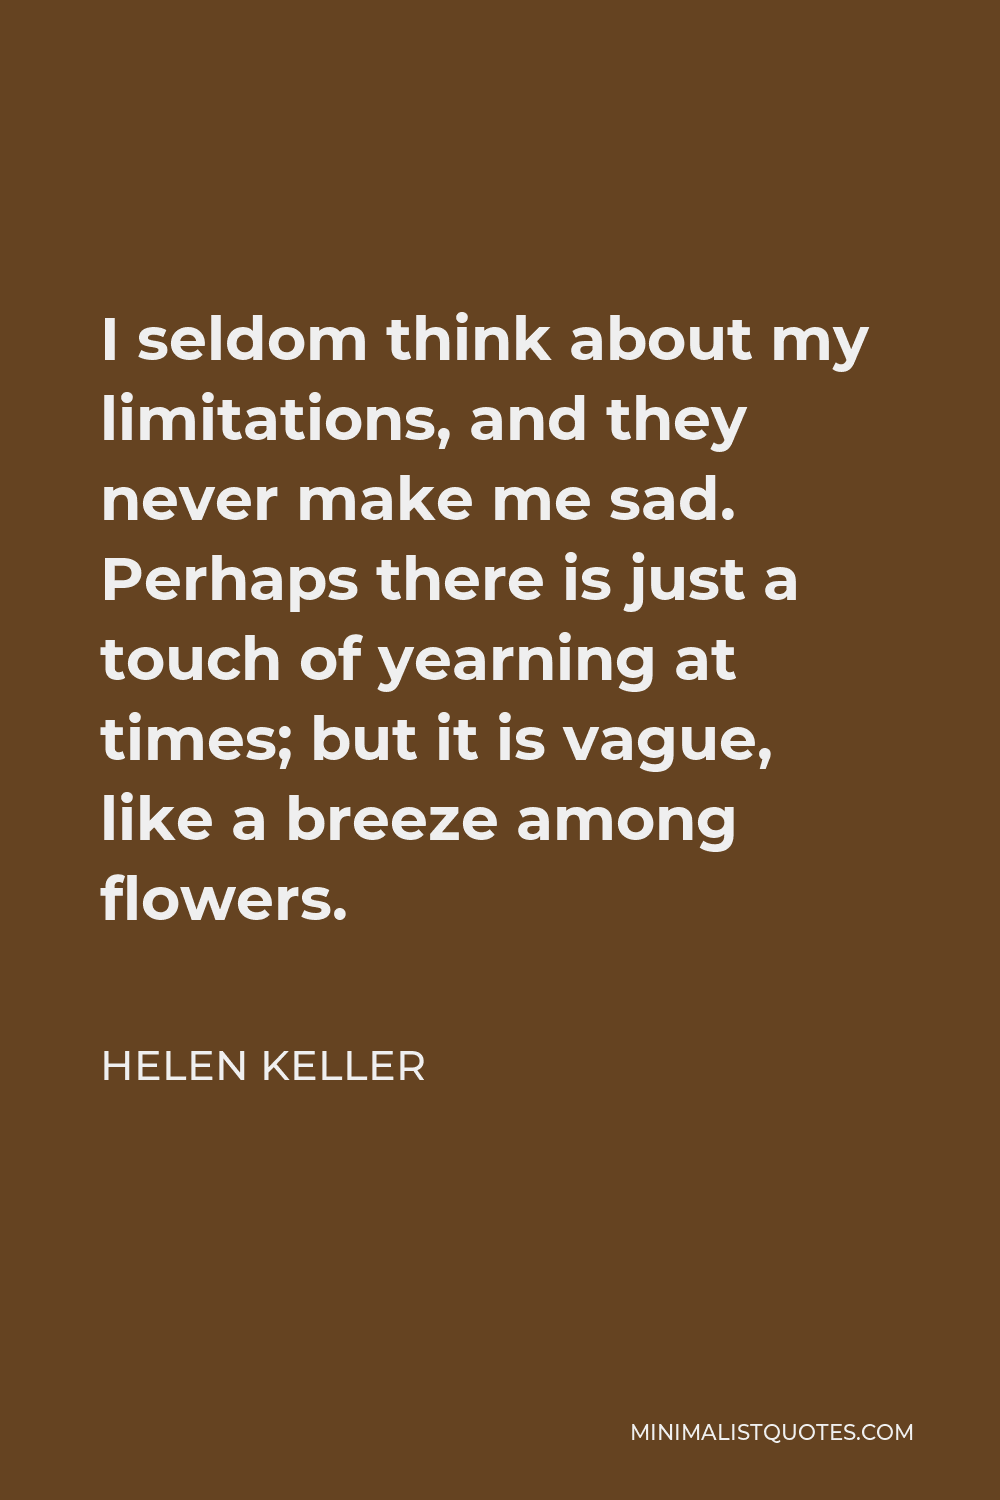 Helen Keller Quote - I seldom think about my limitations, and they never make me sad. Perhaps there is just a touch of yearning at times; but it is vague, like a breeze among flowers.